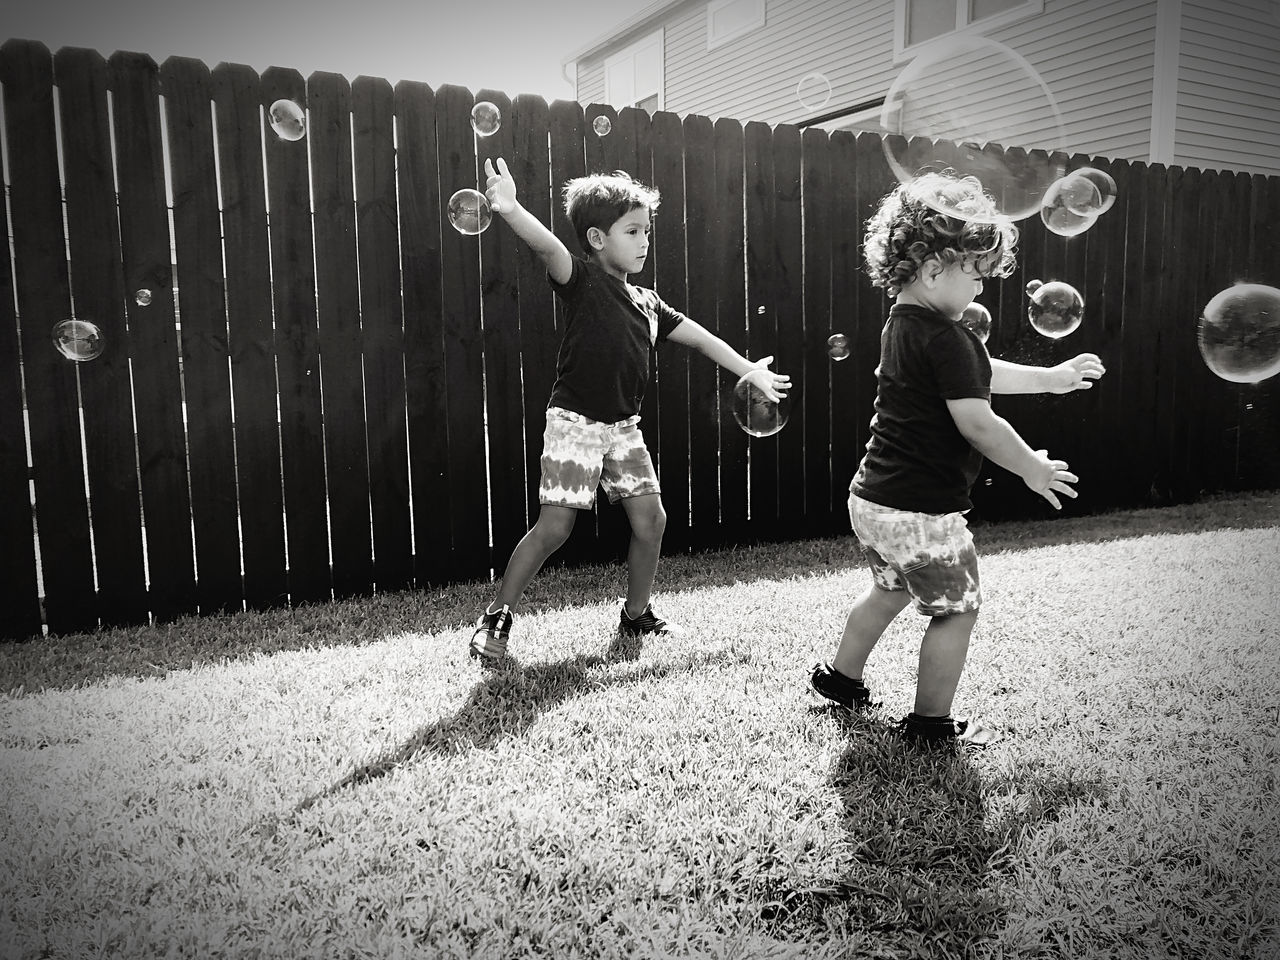 black, white, black and white, child, monochrome, childhood, full length, monochrome photography, men, sports, ball, soccer, two people, motion, fun, togetherness, lifestyles, leisure activity, female, person, adult, casual clothing, playground, women, day, team sport, nature, friendship, darkness, soccer ball, outdoors